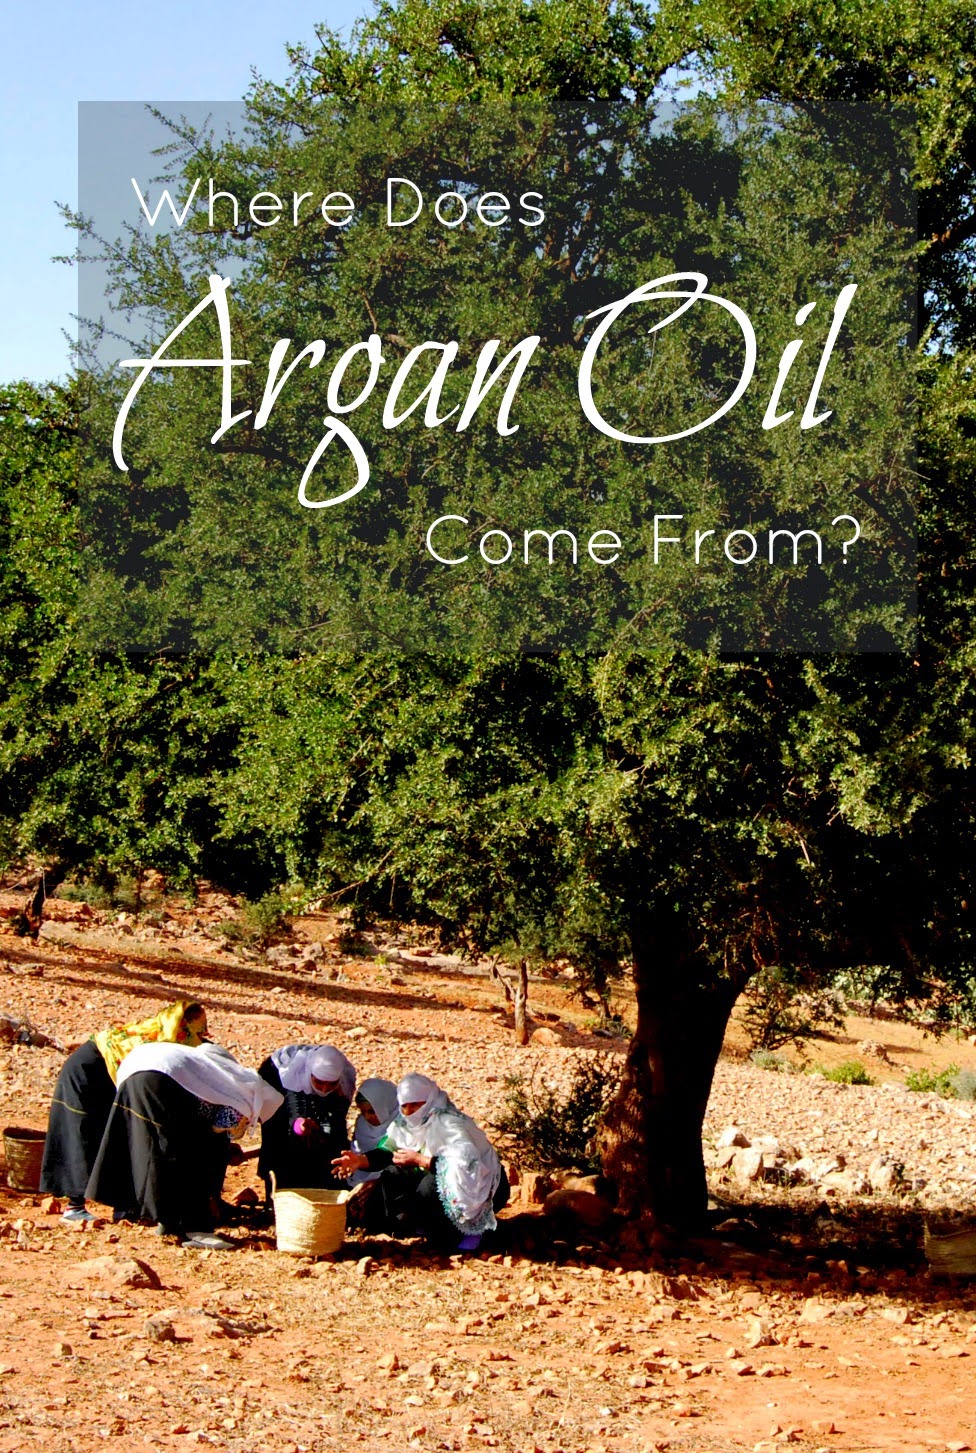 Do you know where does Argan Oil come from? So interesting!